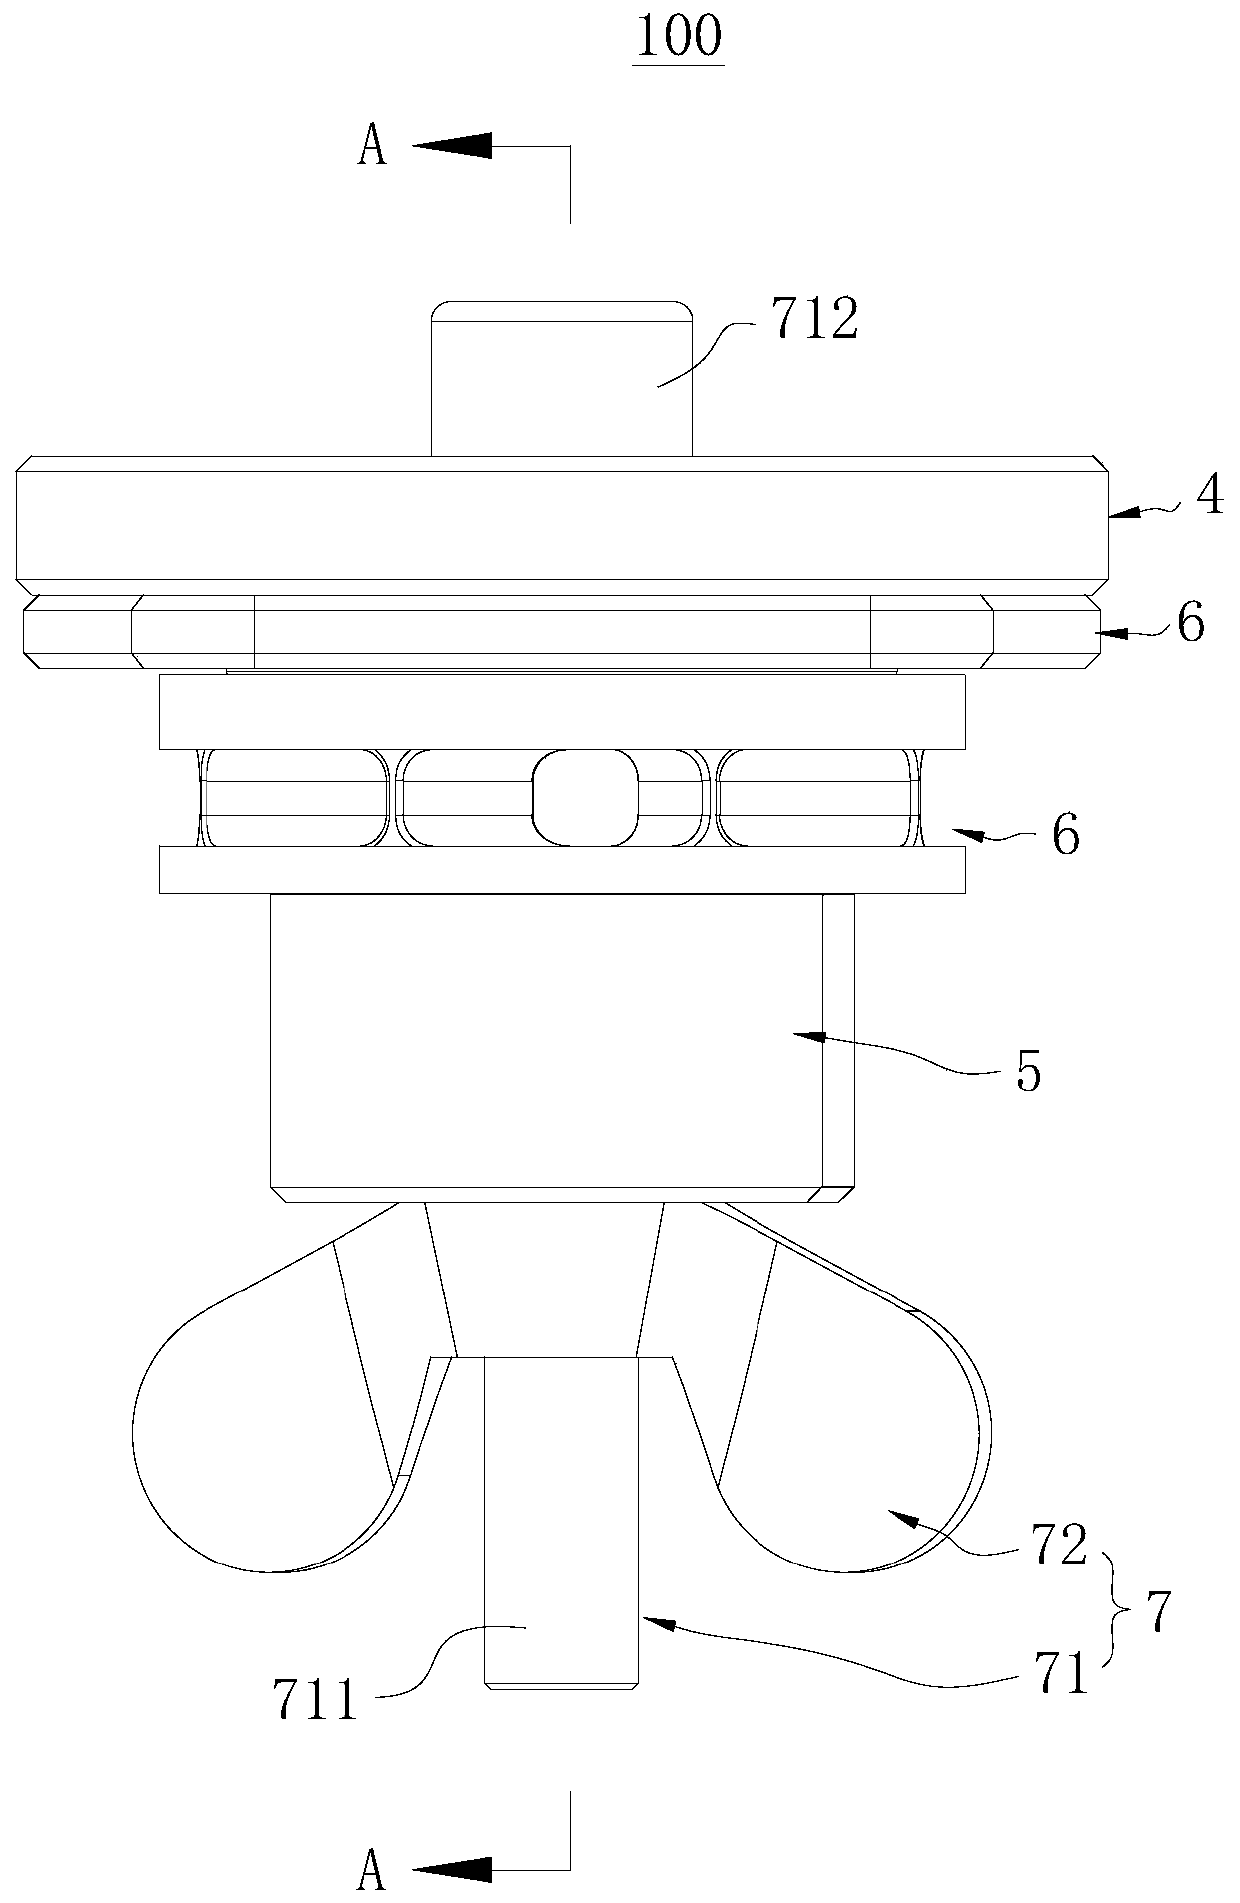 Assembly jig and assembly method of Halbach array magnets